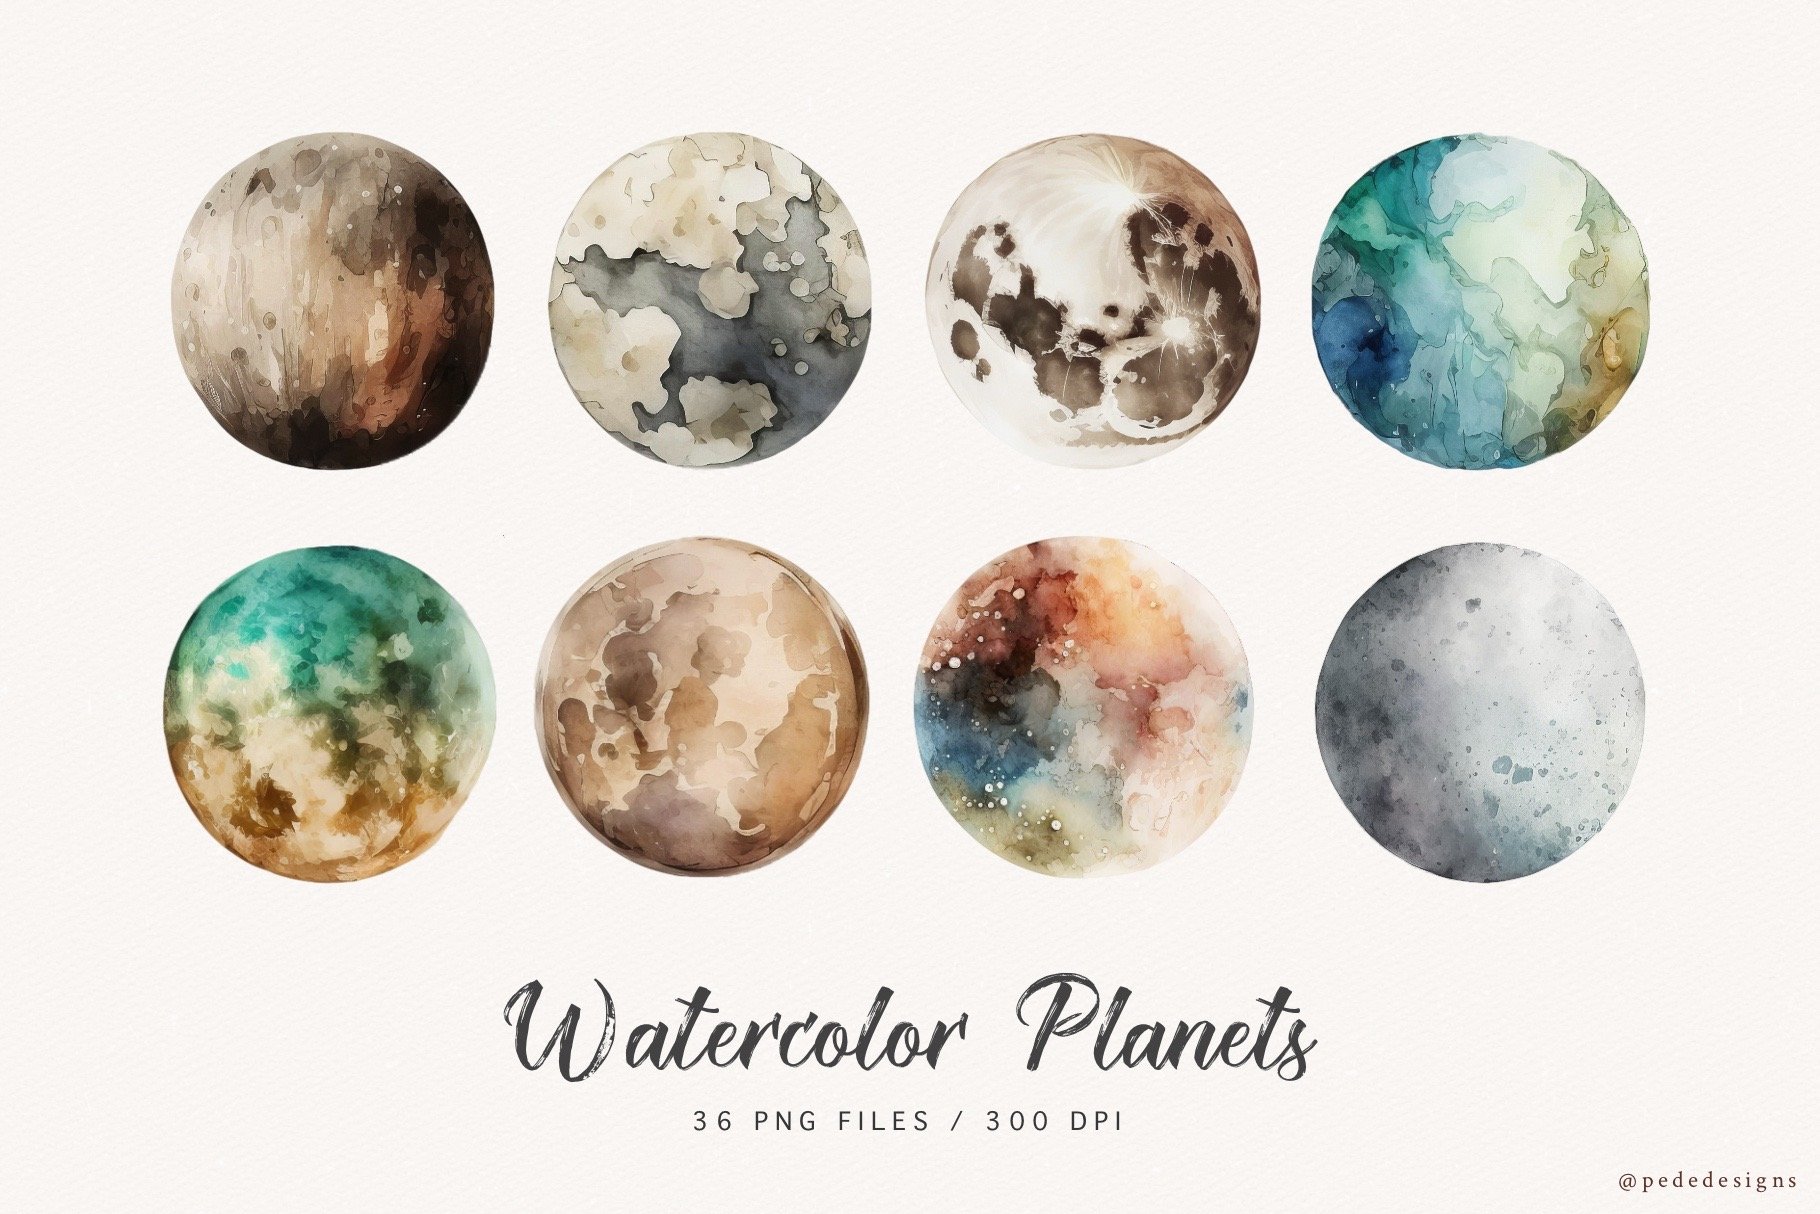 Watercolor Planets preview image.